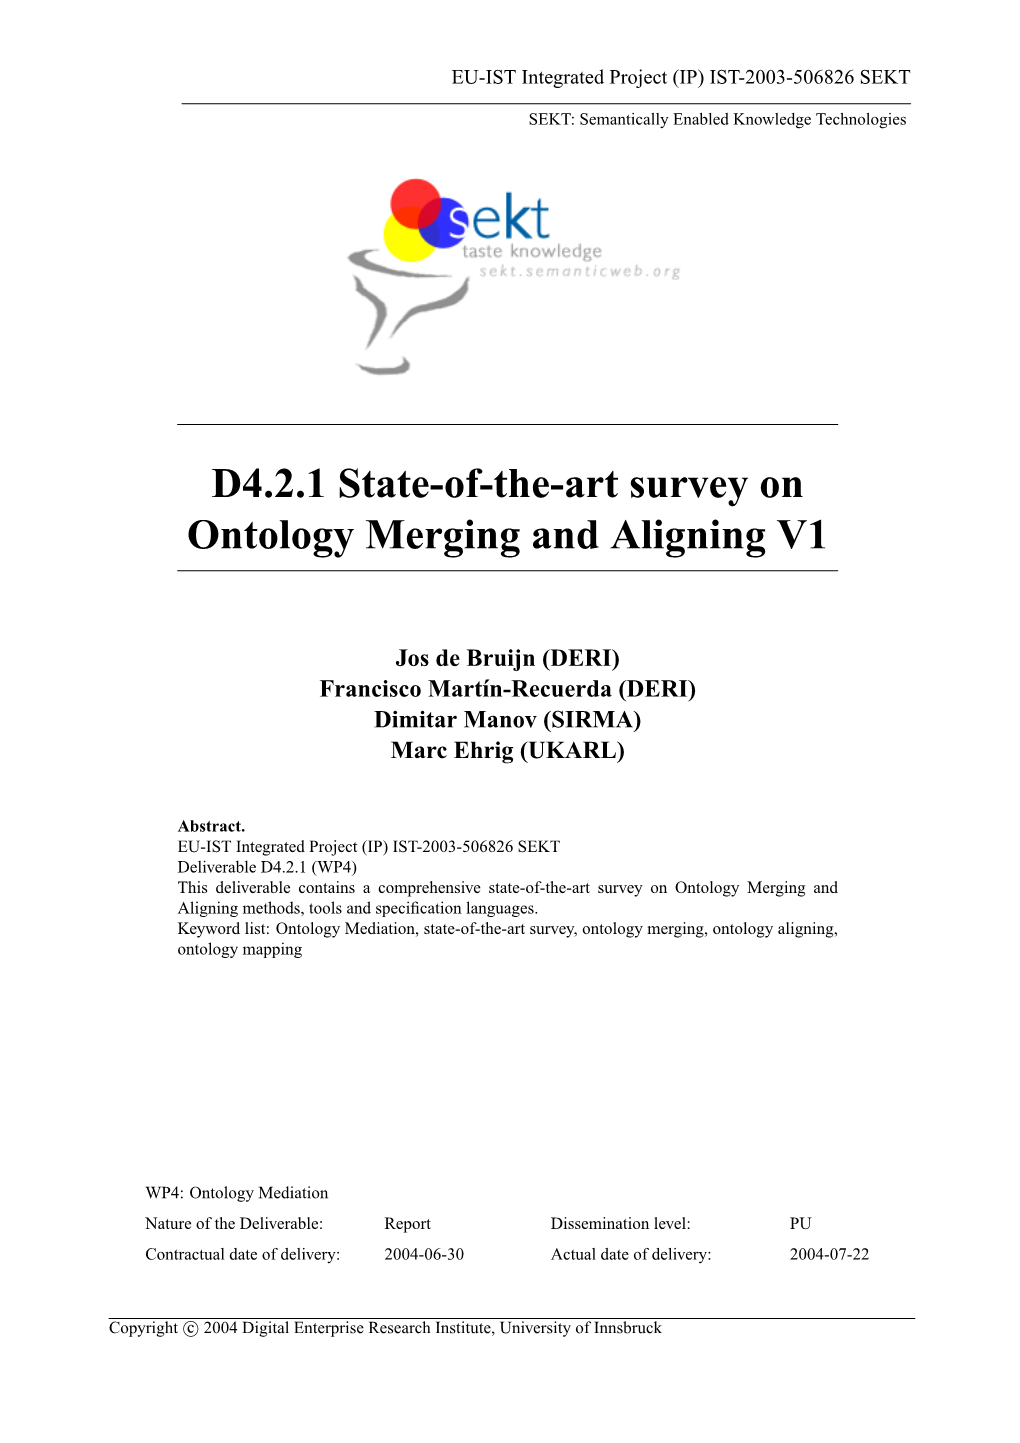 D4.2.1 State-Of-The-Art Survey on Ontology Merging and Aligning V1